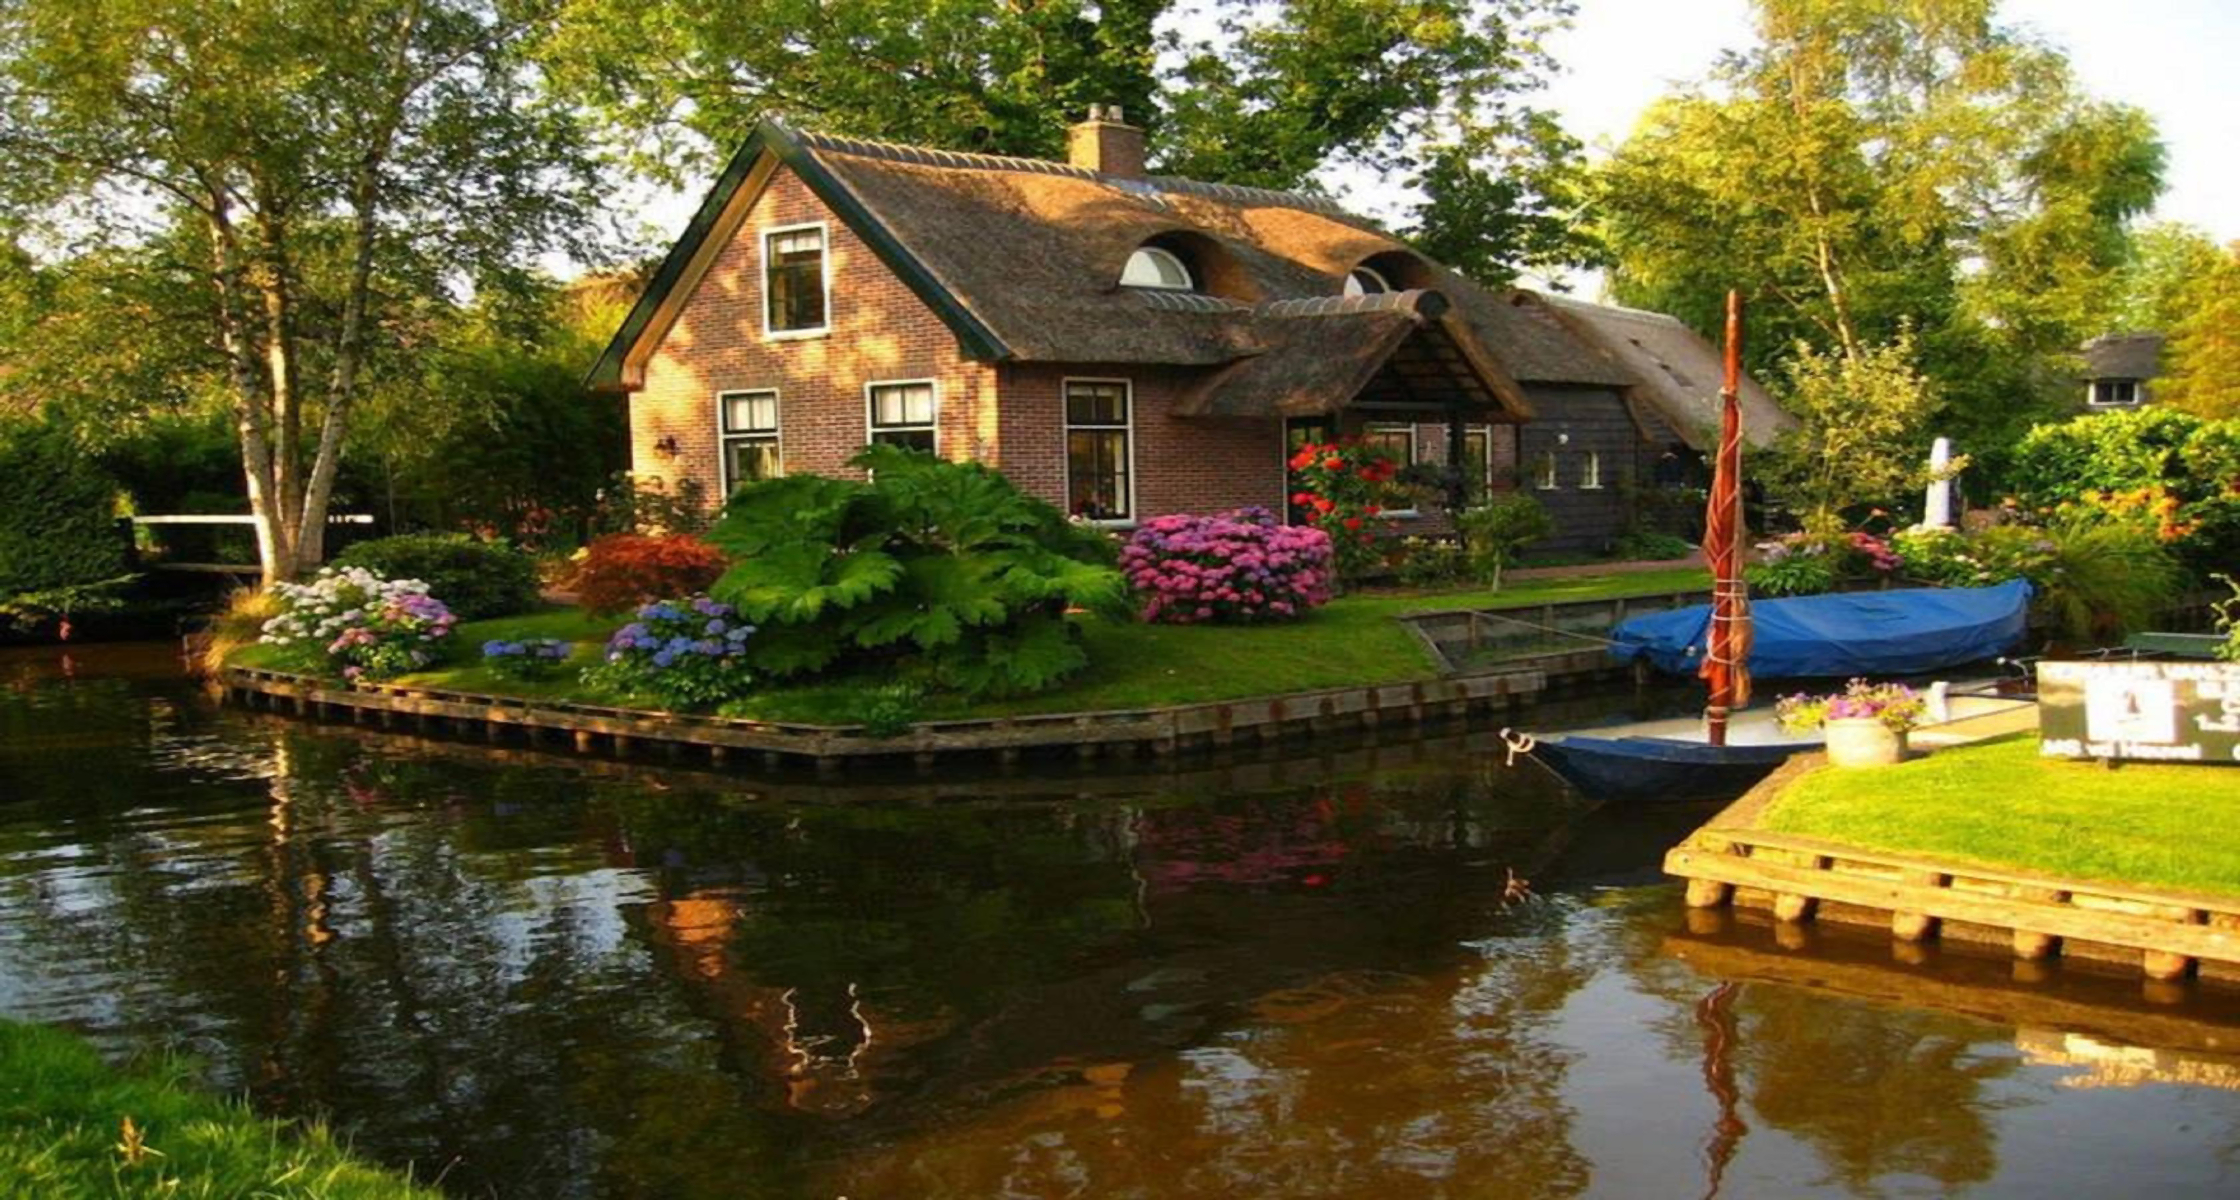 Boat Bush Canal Flower House Man Made Spring Thatched Roof 2240x1200